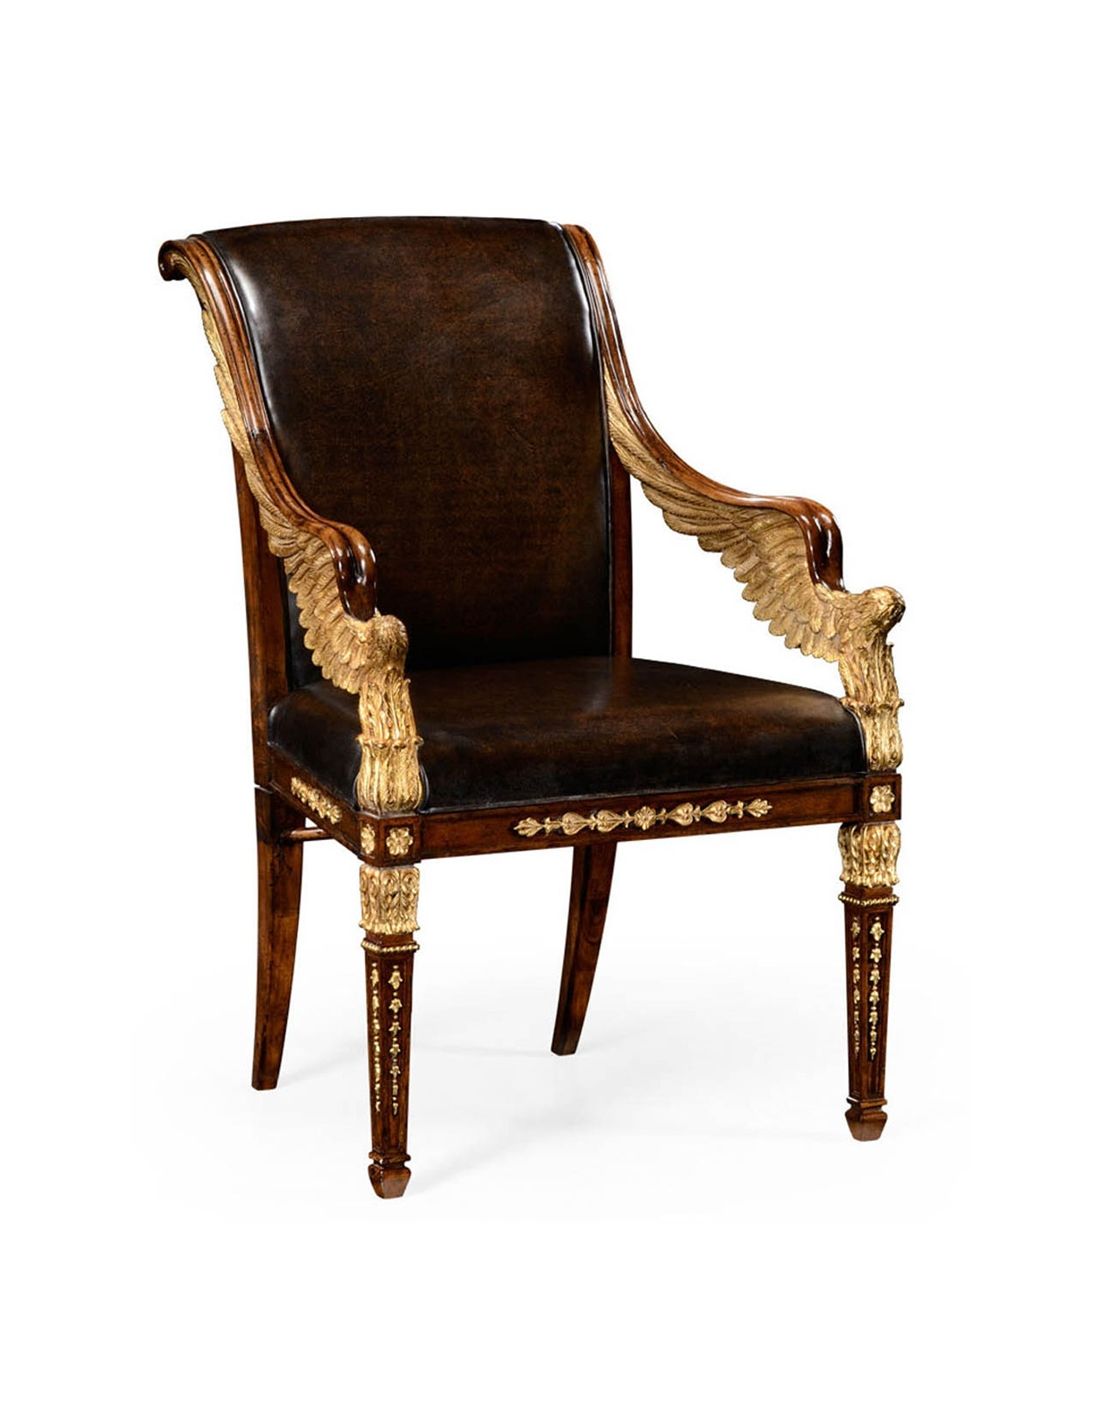 French Empire Furniture